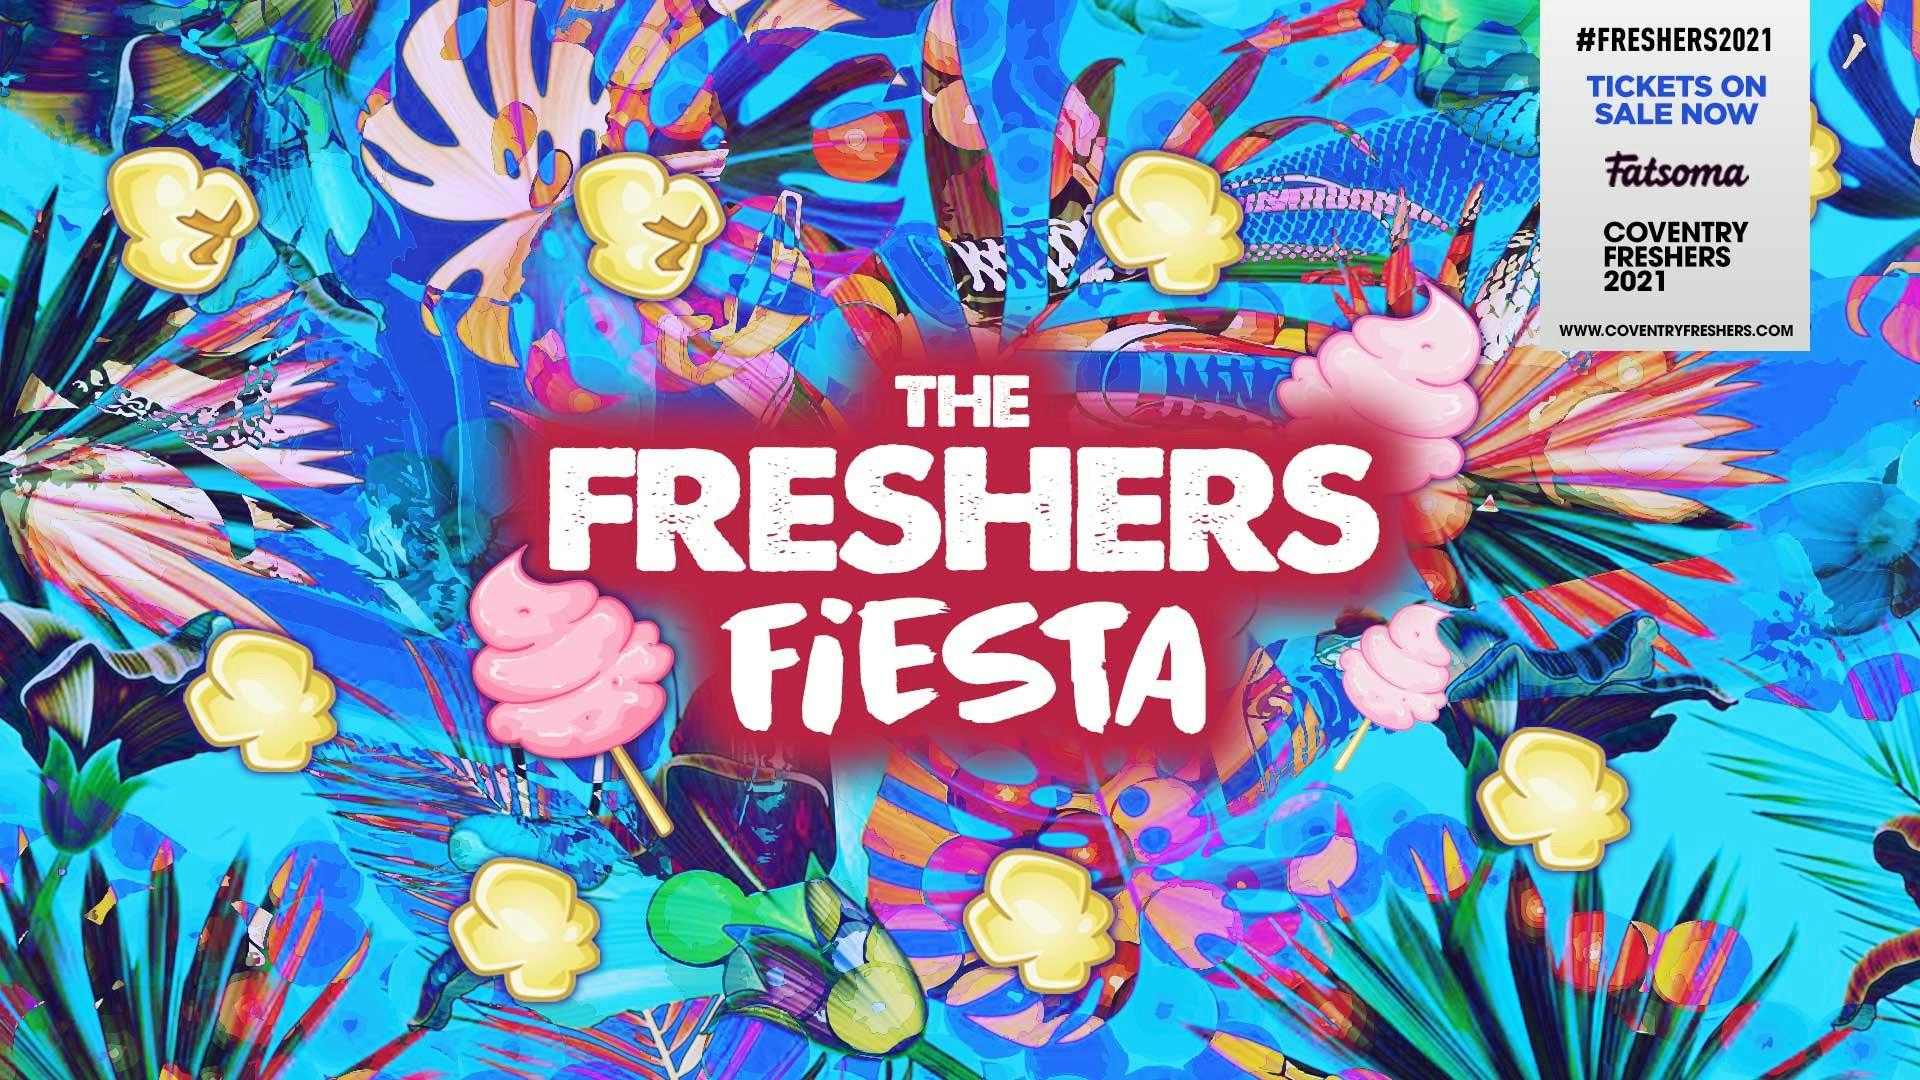 Freshers Fiesta | Coventry Freshers 2021 – Final 100 Tickets!